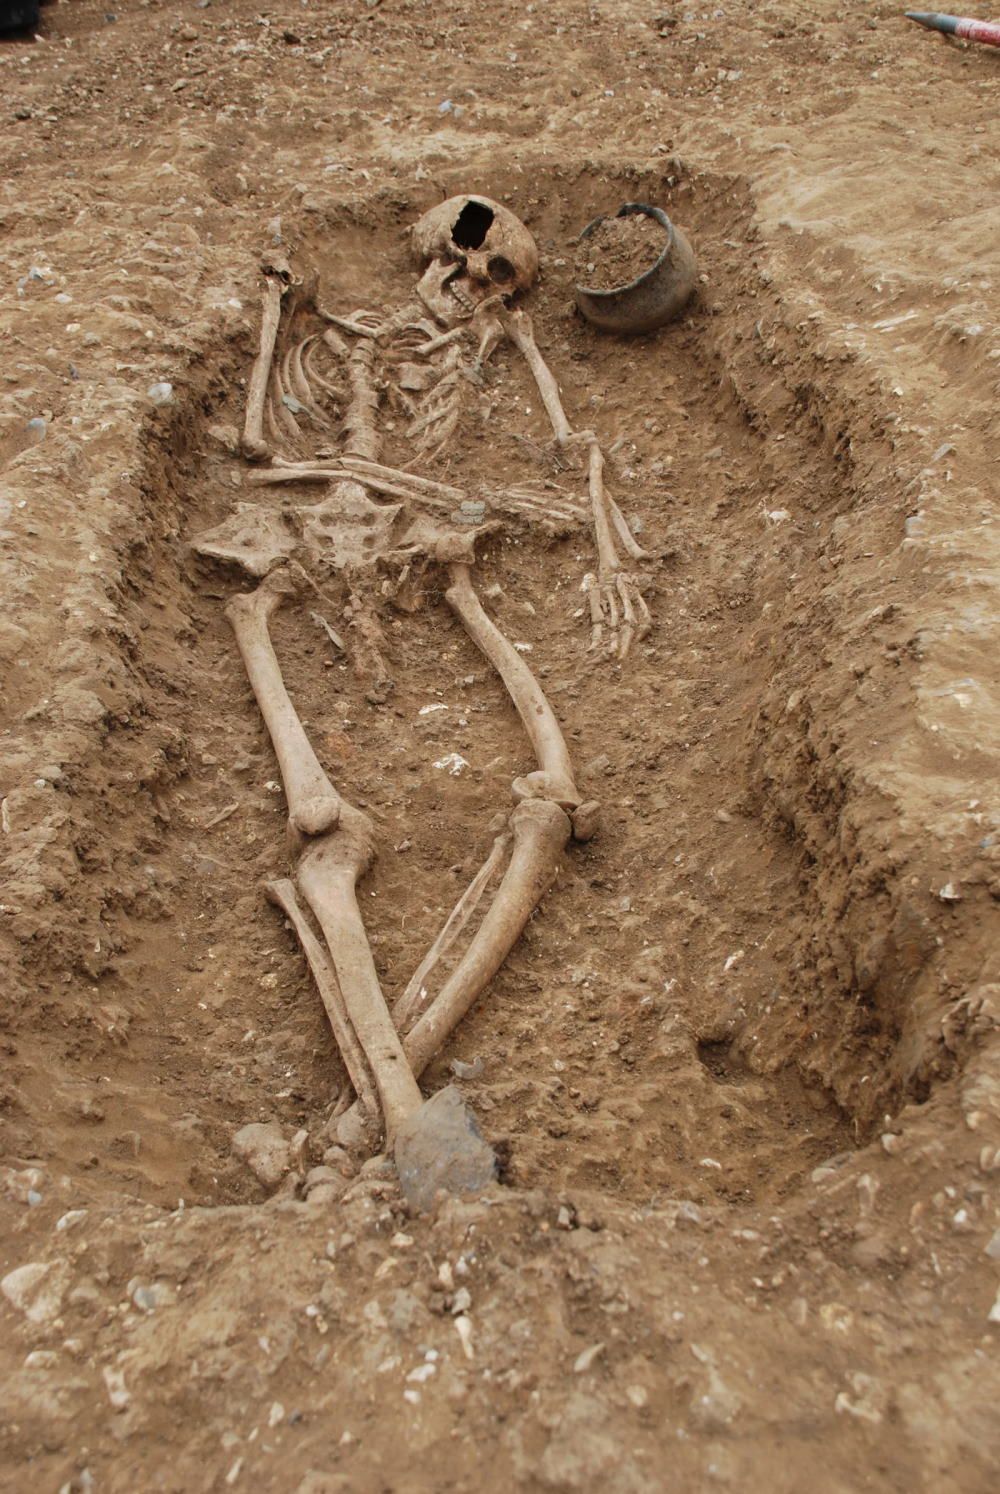 An early medieval English grave with a skeleton, pottery vessel, brooches and a Roman spoon.